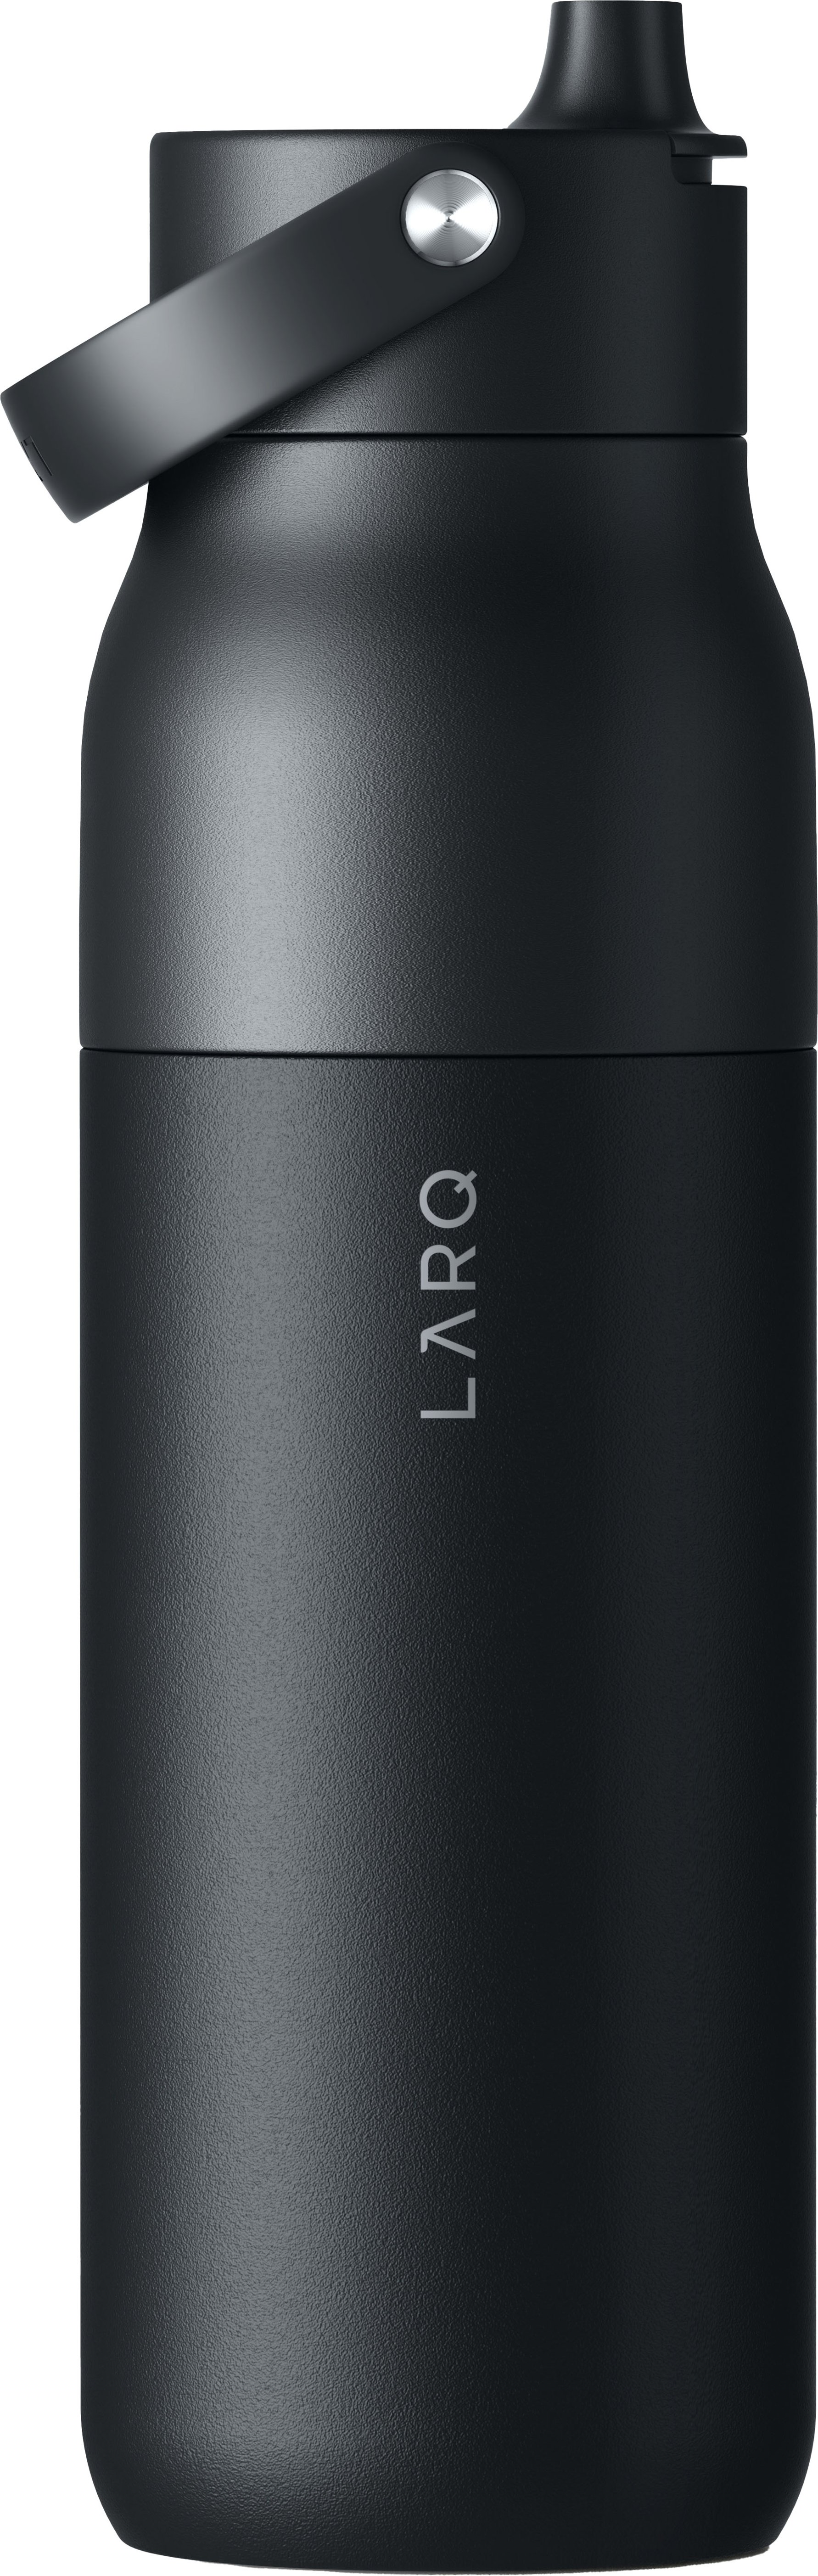 LARQ Bottle Filtered: The 200 Best Inventions of 2022